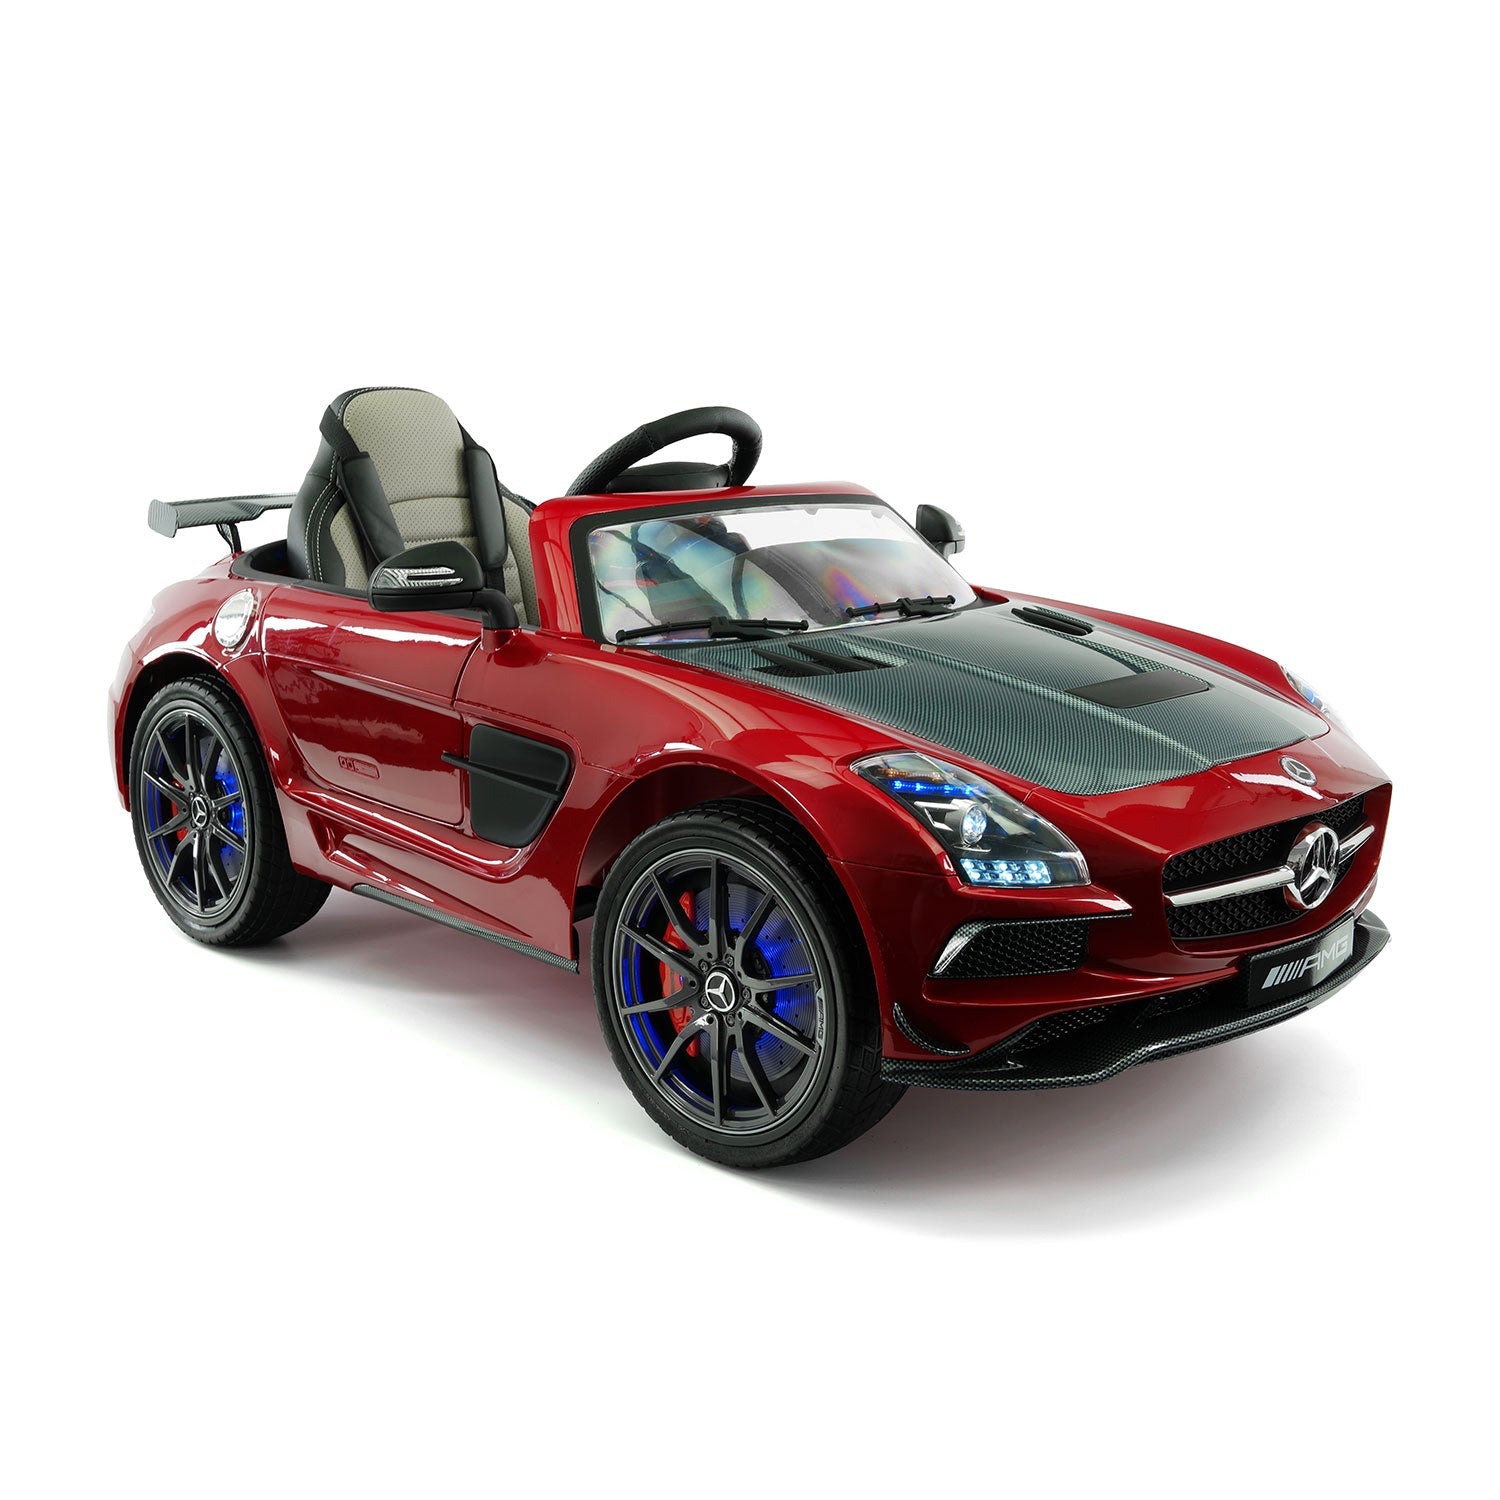 Mercedes Sls Amg Final Edition 12v Kids Ride-on Car With Parental Remote | Cherry Red